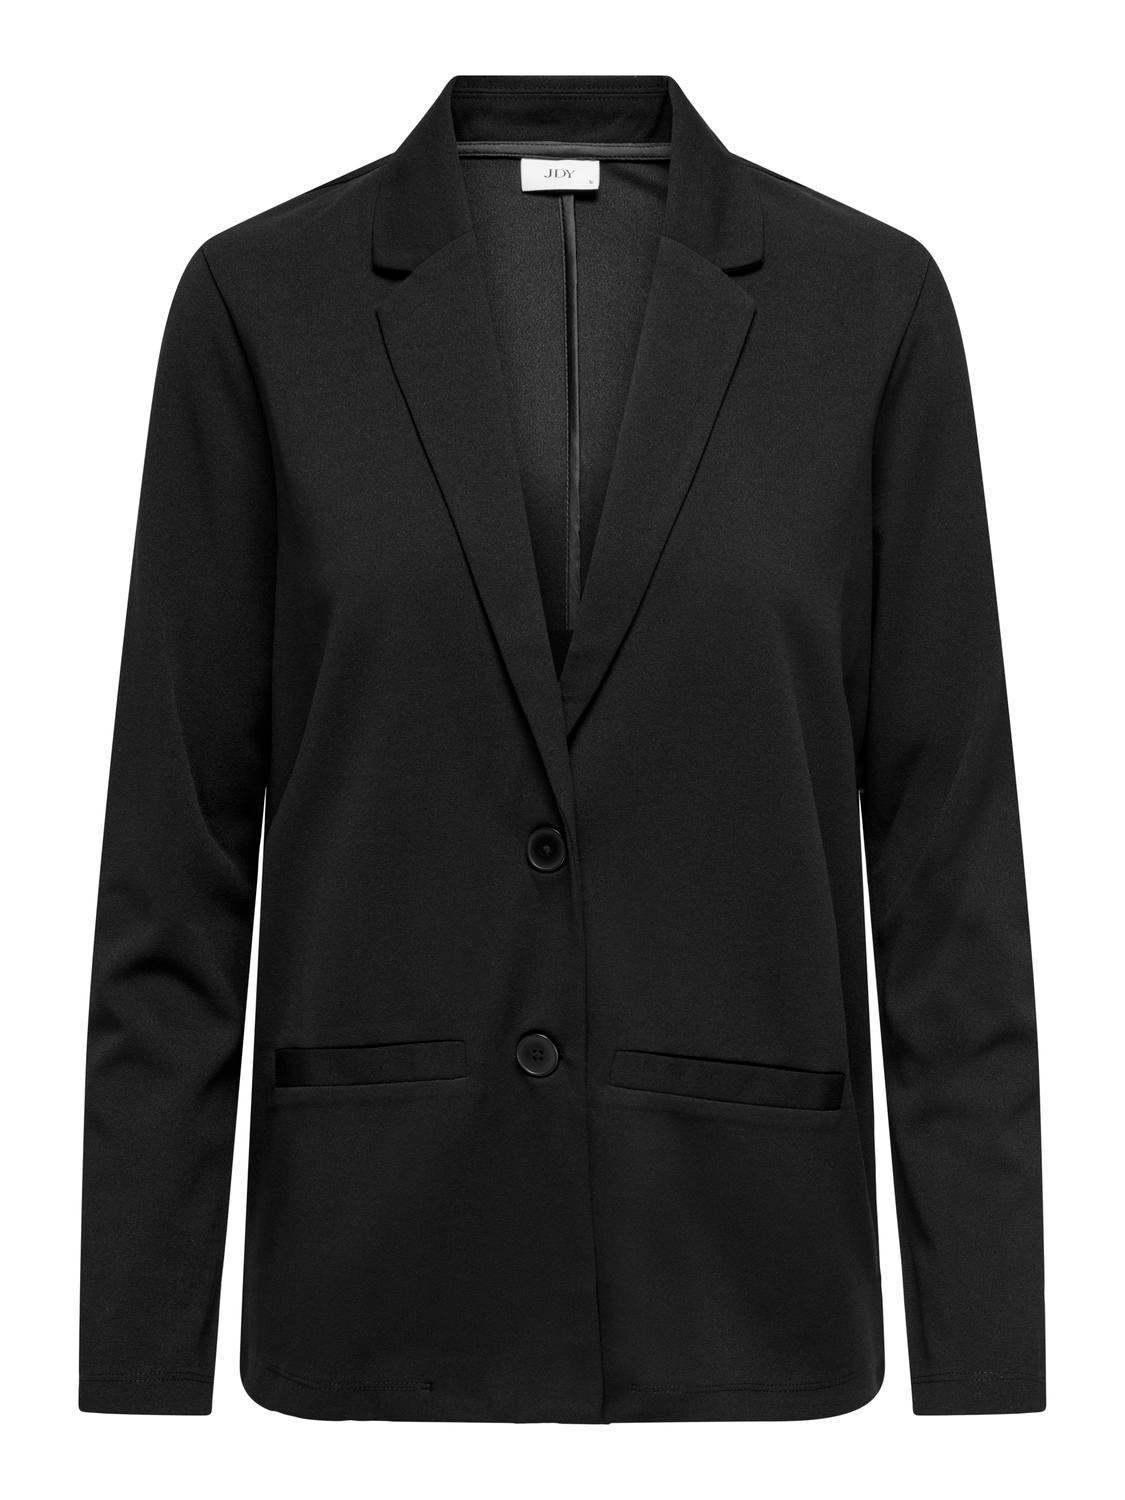 ONLY Blazer with buttons -Black - 15221235